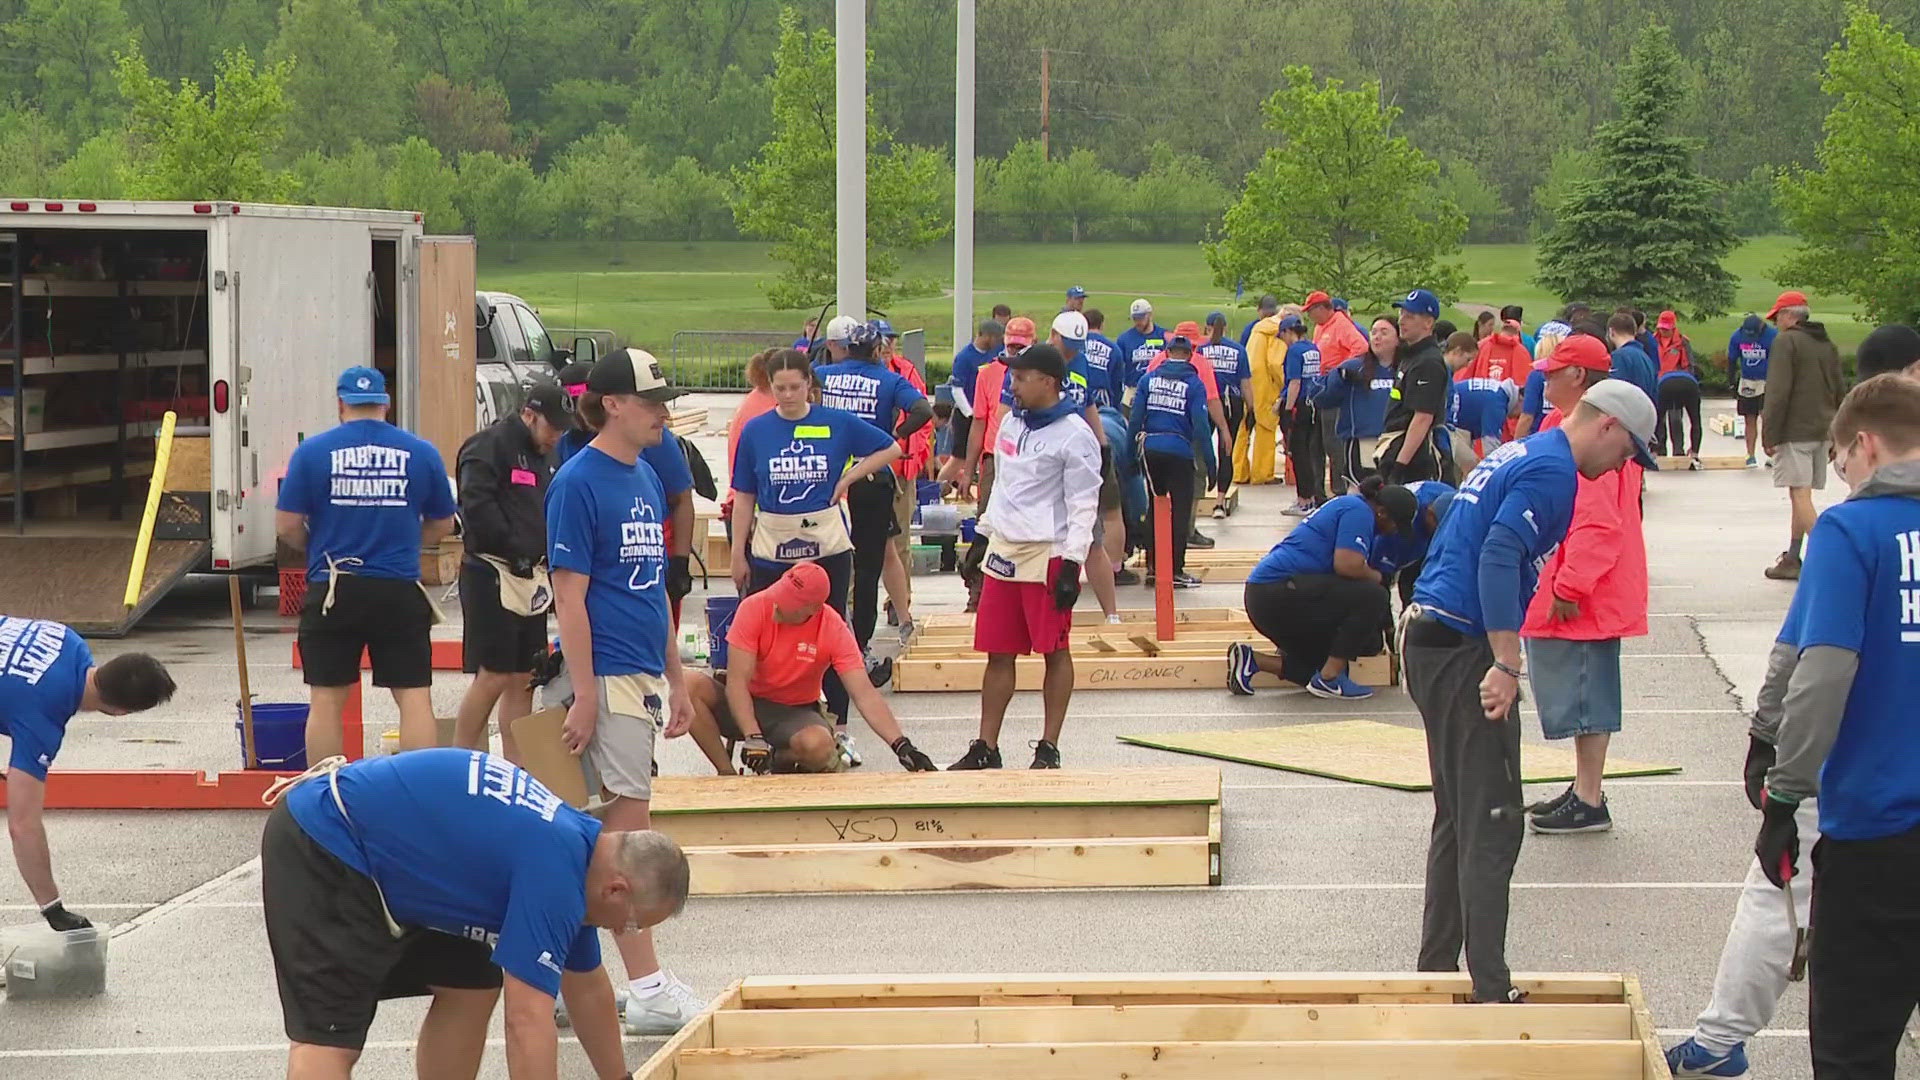 Nearly 100 volunteers from the Colts and Indiana Farm Bureau Insurance helped put together parts of a home on Friday.